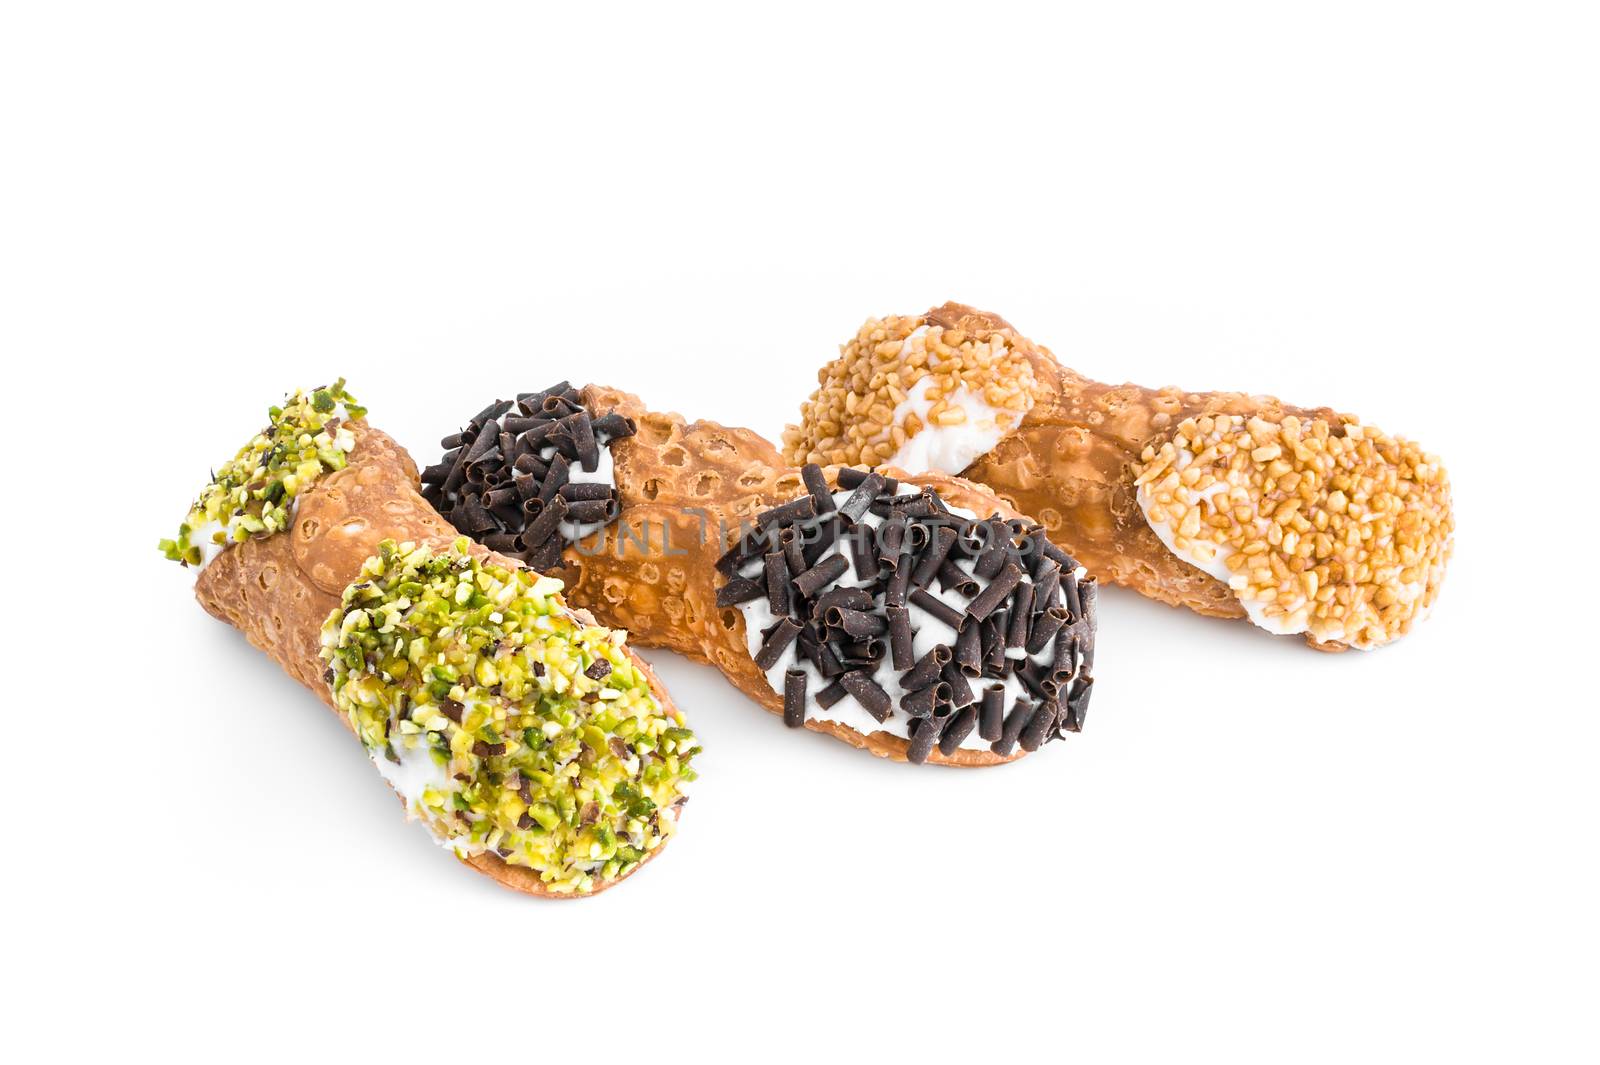 Three cannoli pastries. Traditional Sicilian dessert, filled with a rich ricotta cream enriched with pistachio grain, hazelnut grain and chocolate flakes.